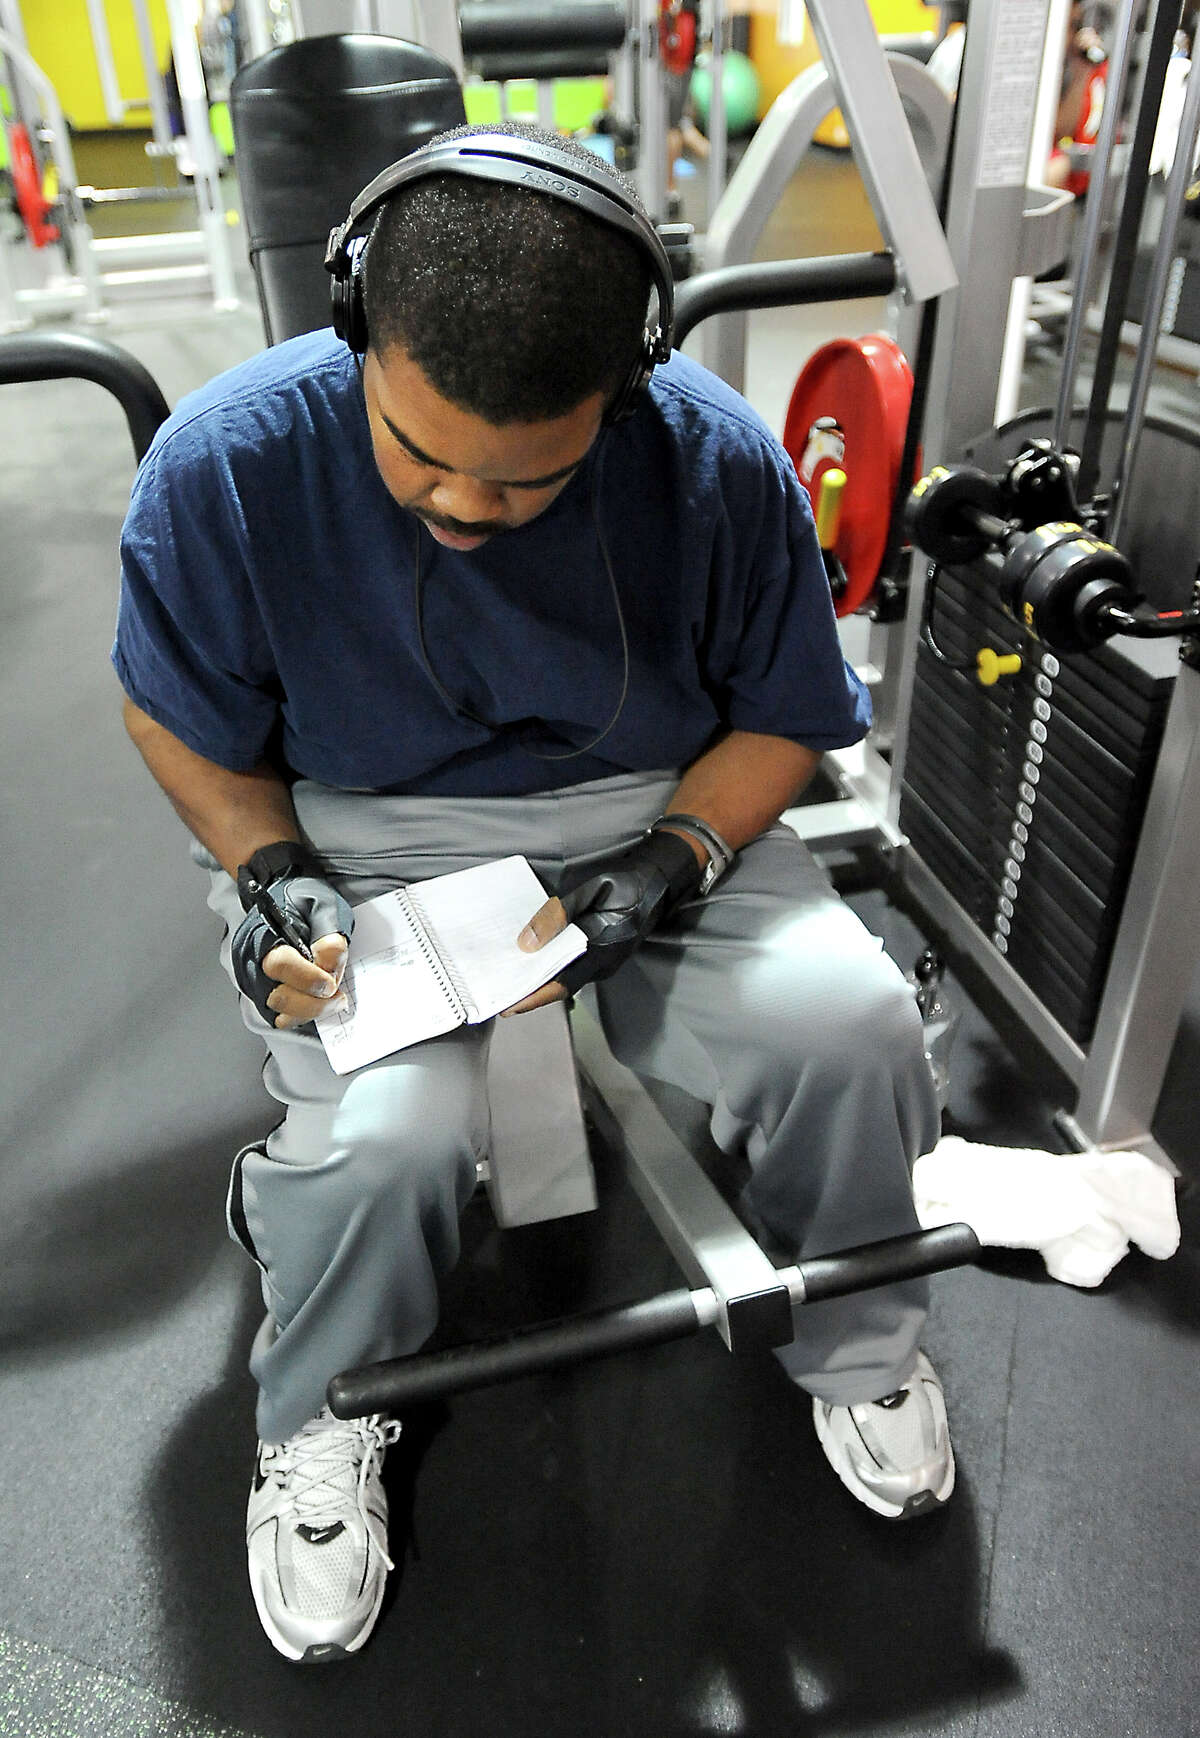 Willie Gillis III takes notes about his works outs at Exygon Health and Fitness Club in Beaumont in Beaumont, Thursday, April 12, 2012. Gillis has lost 230 pounds through diet and exercise. Tammy McKinley/The Enterprise